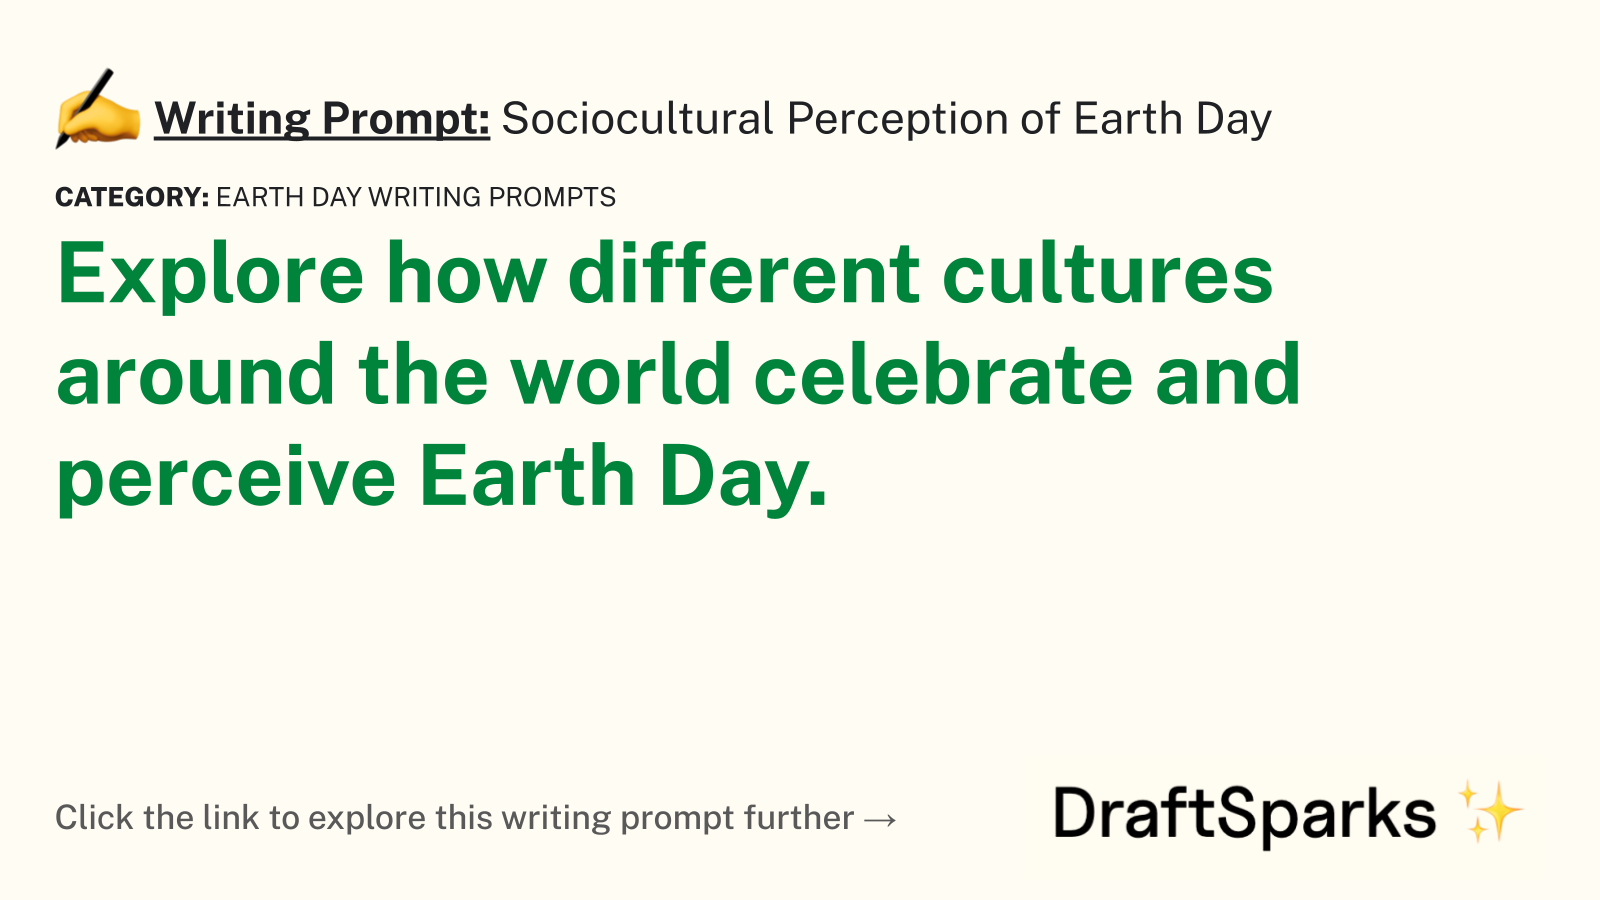 Sociocultural Perception of Earth Day